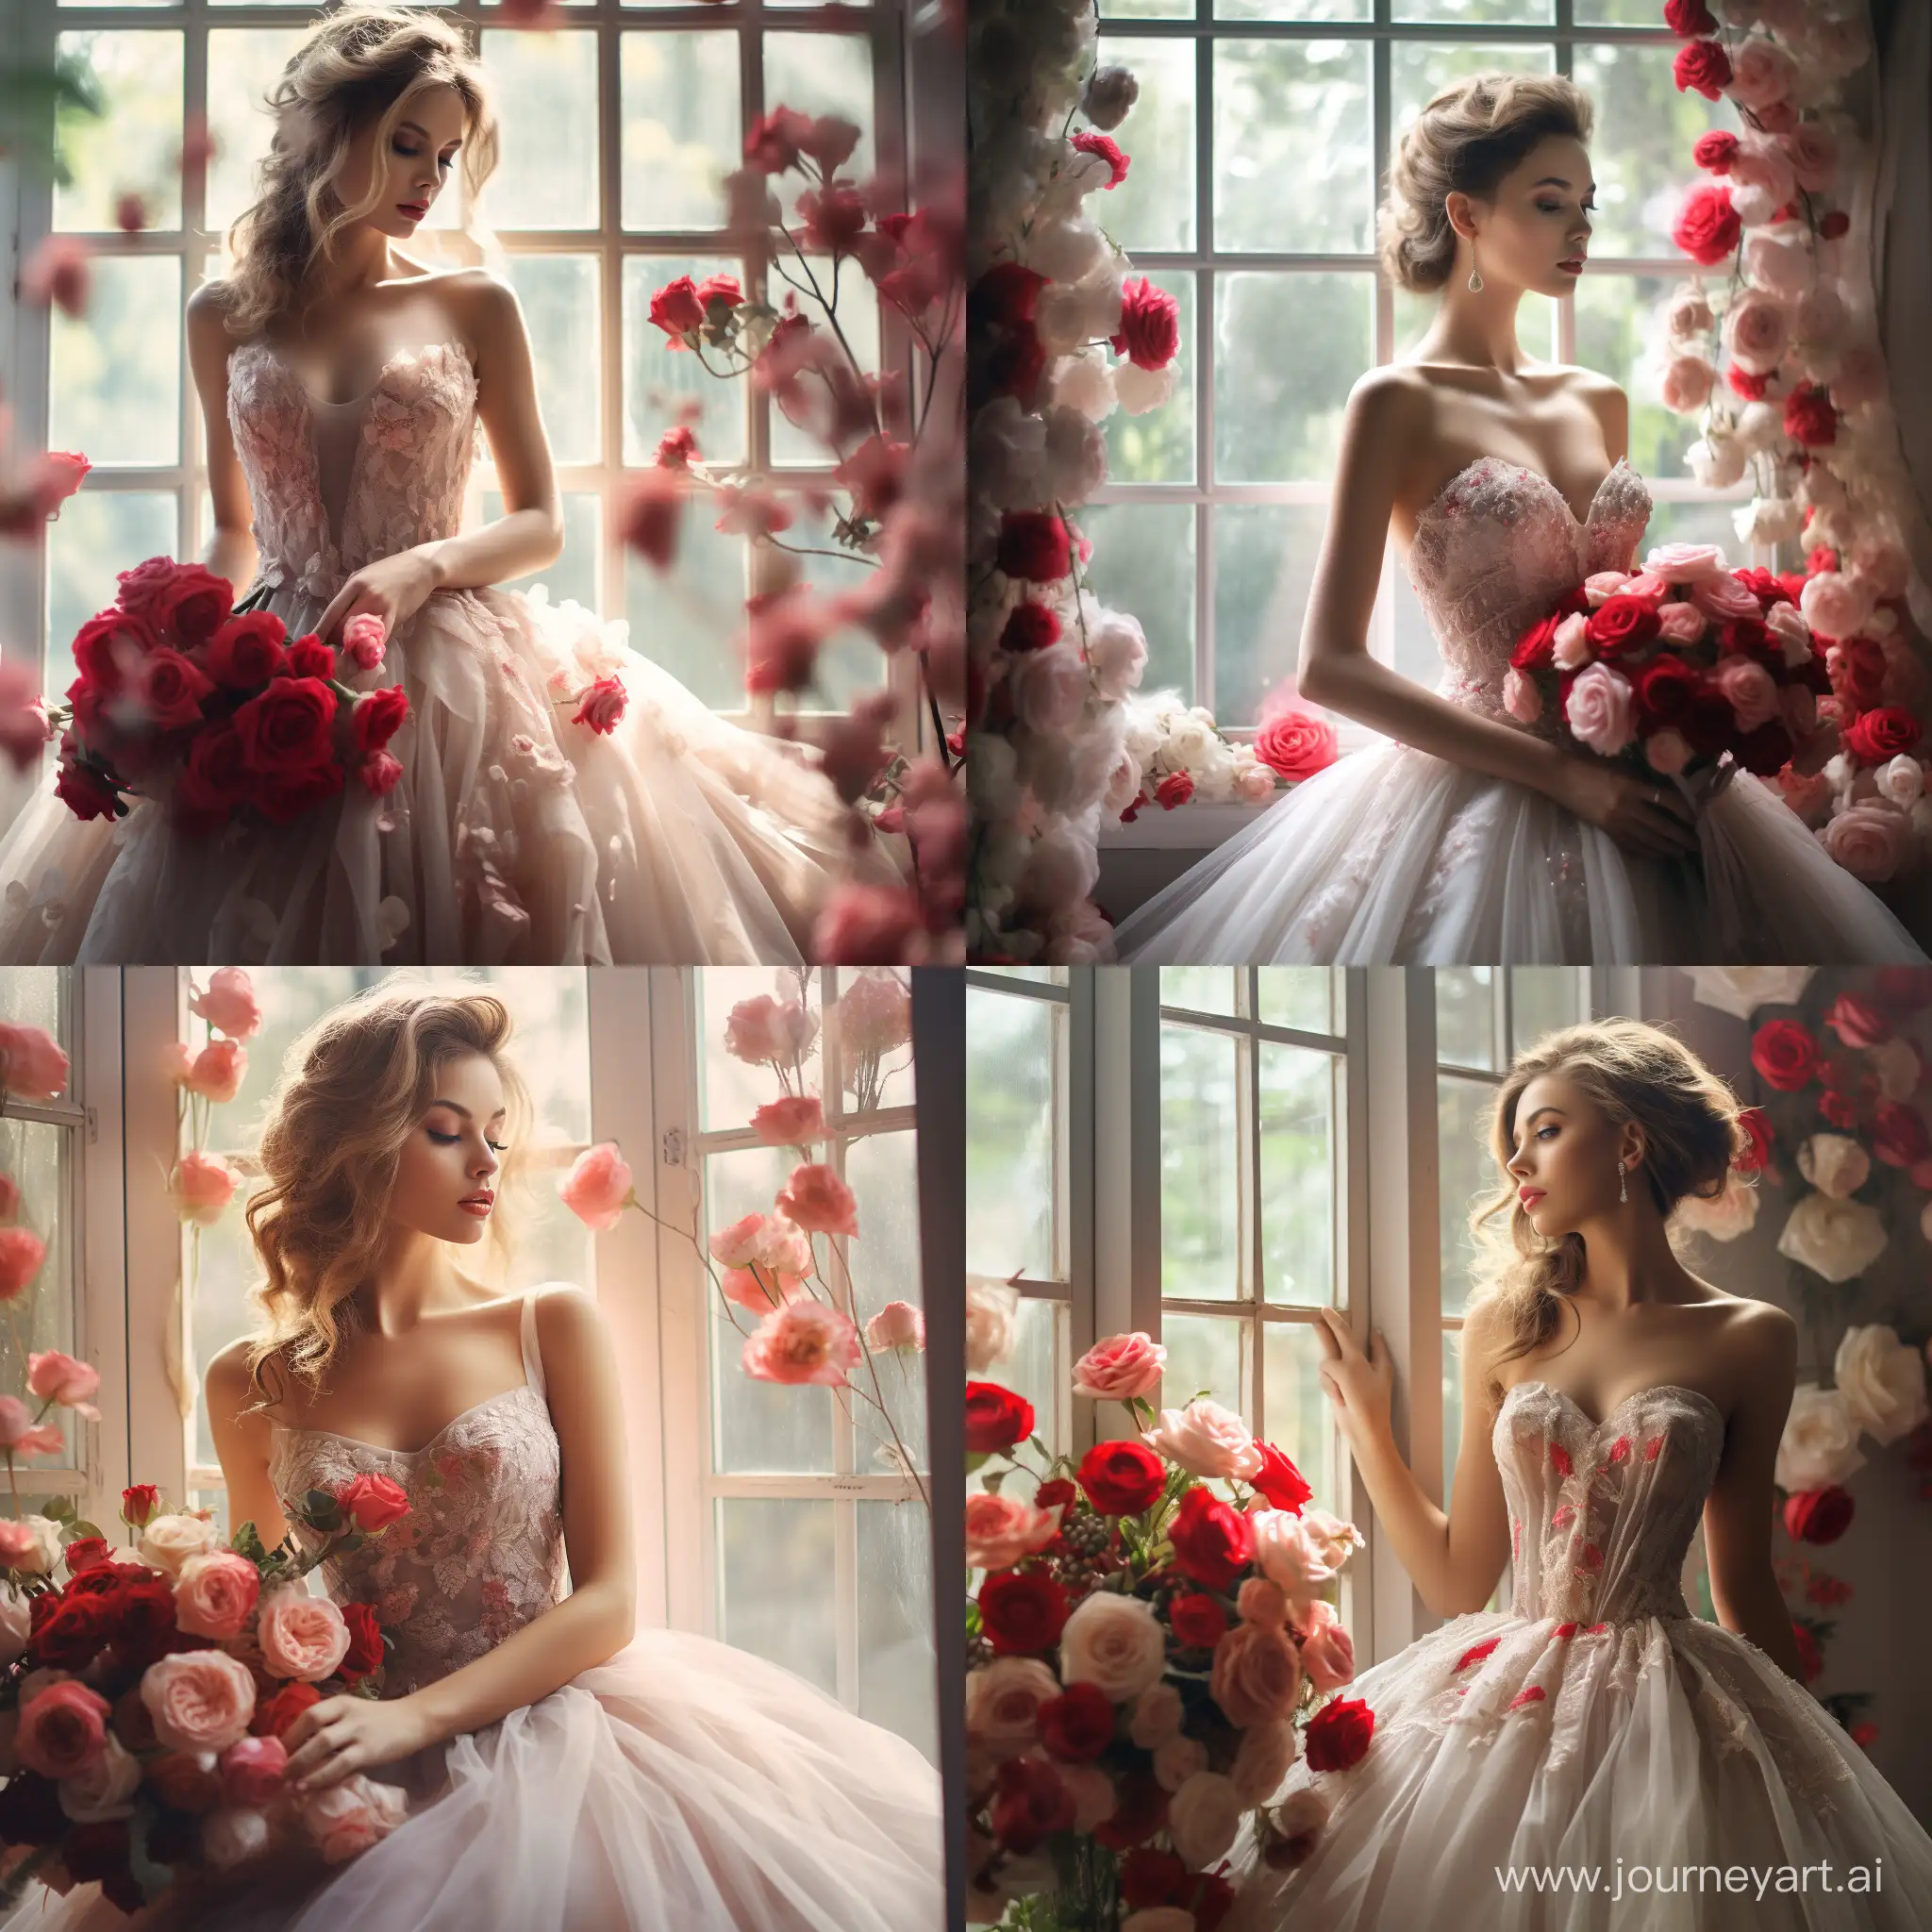 Ethereal-Wedding-Elegance-Stunning-Bride-with-Delicate-Roses-in-a-Picturesque-Garden